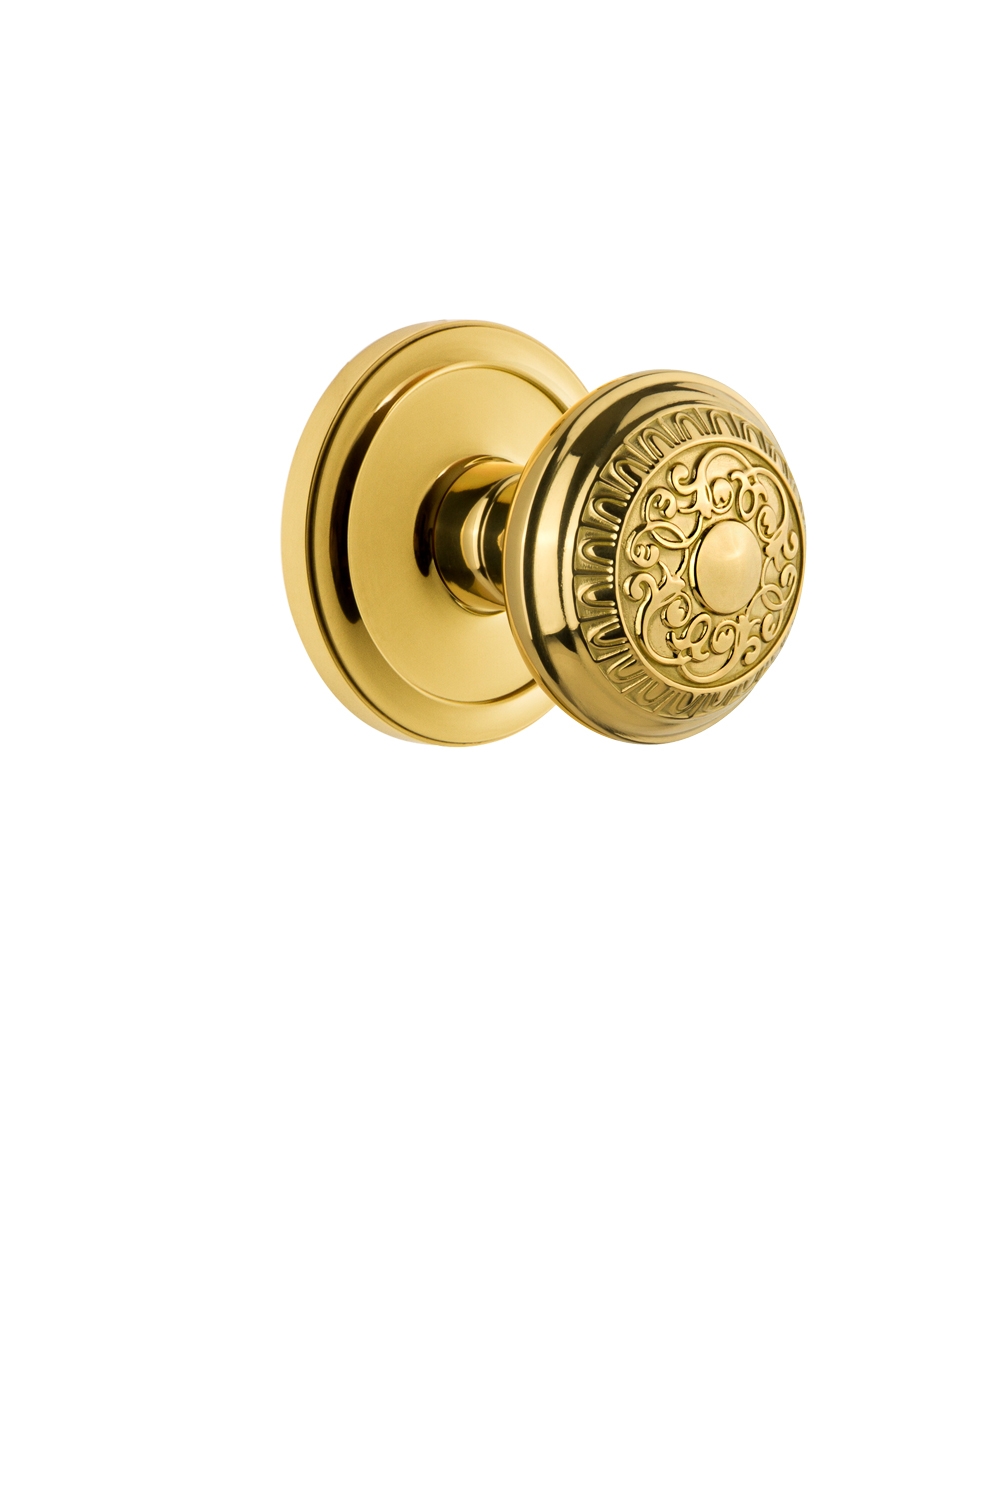 Grandeur Circulaire Rosette Dummy with Windsor Knob in Lifetime Brass -  809941